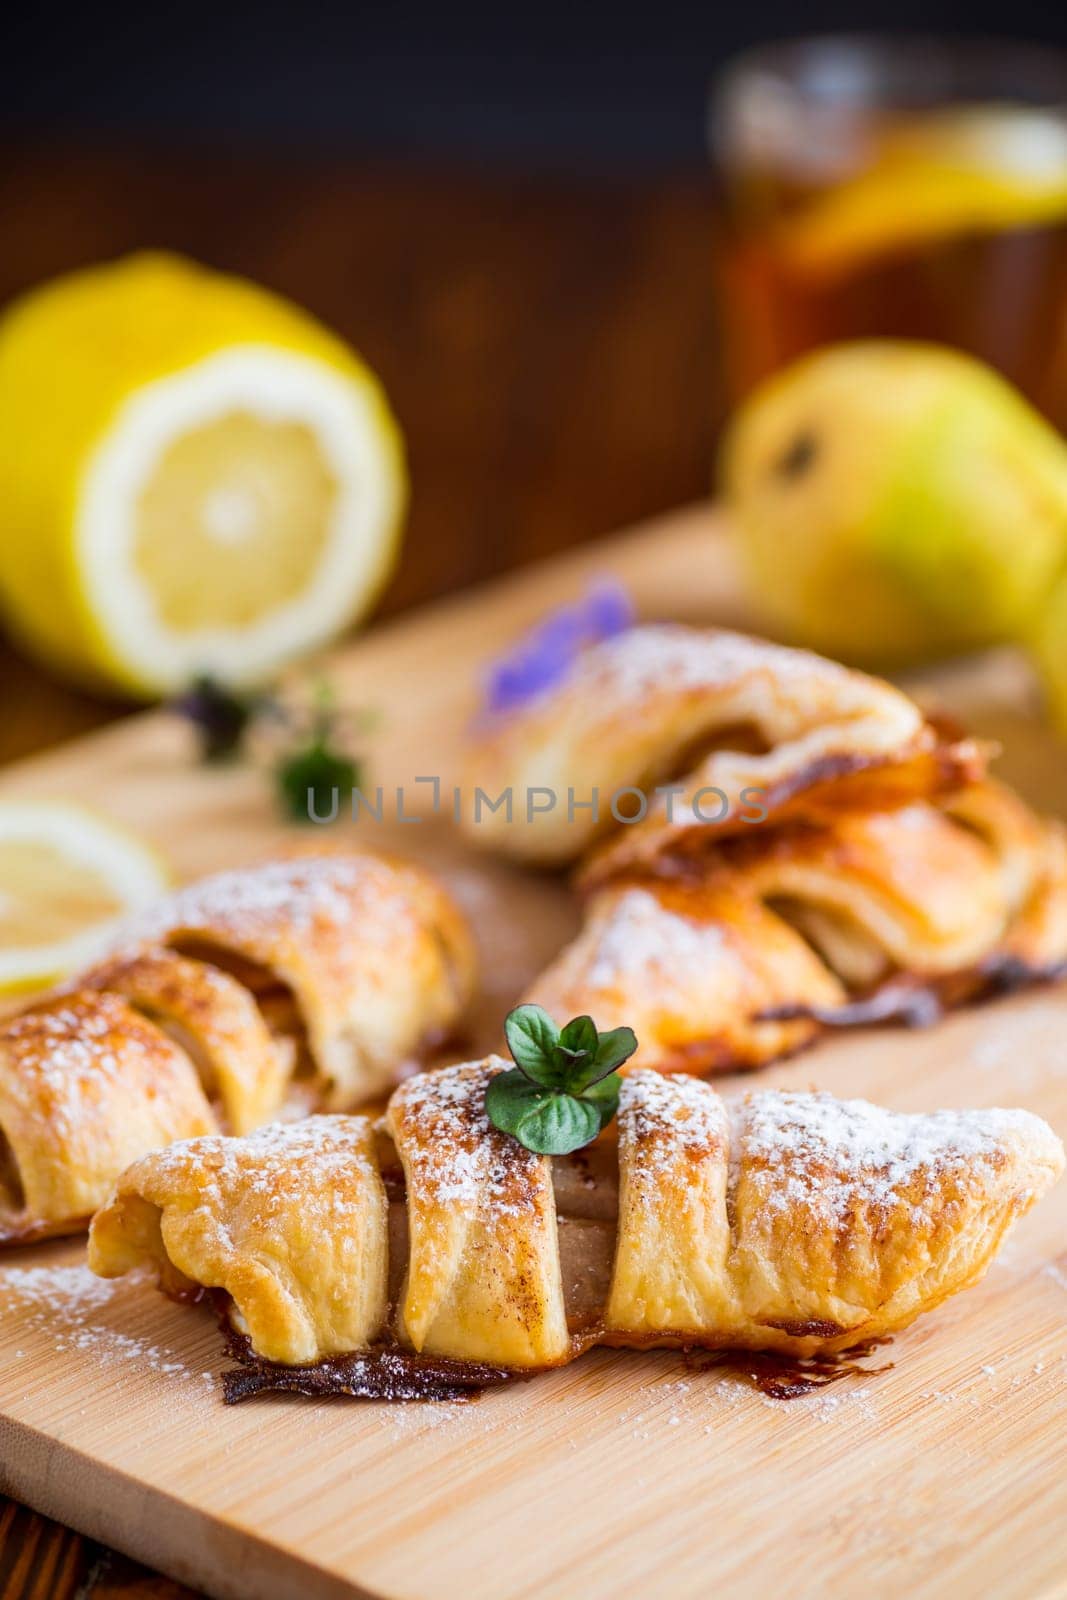 Sweet pastries, puff pastries with pears, on a wooden table by Rawlik